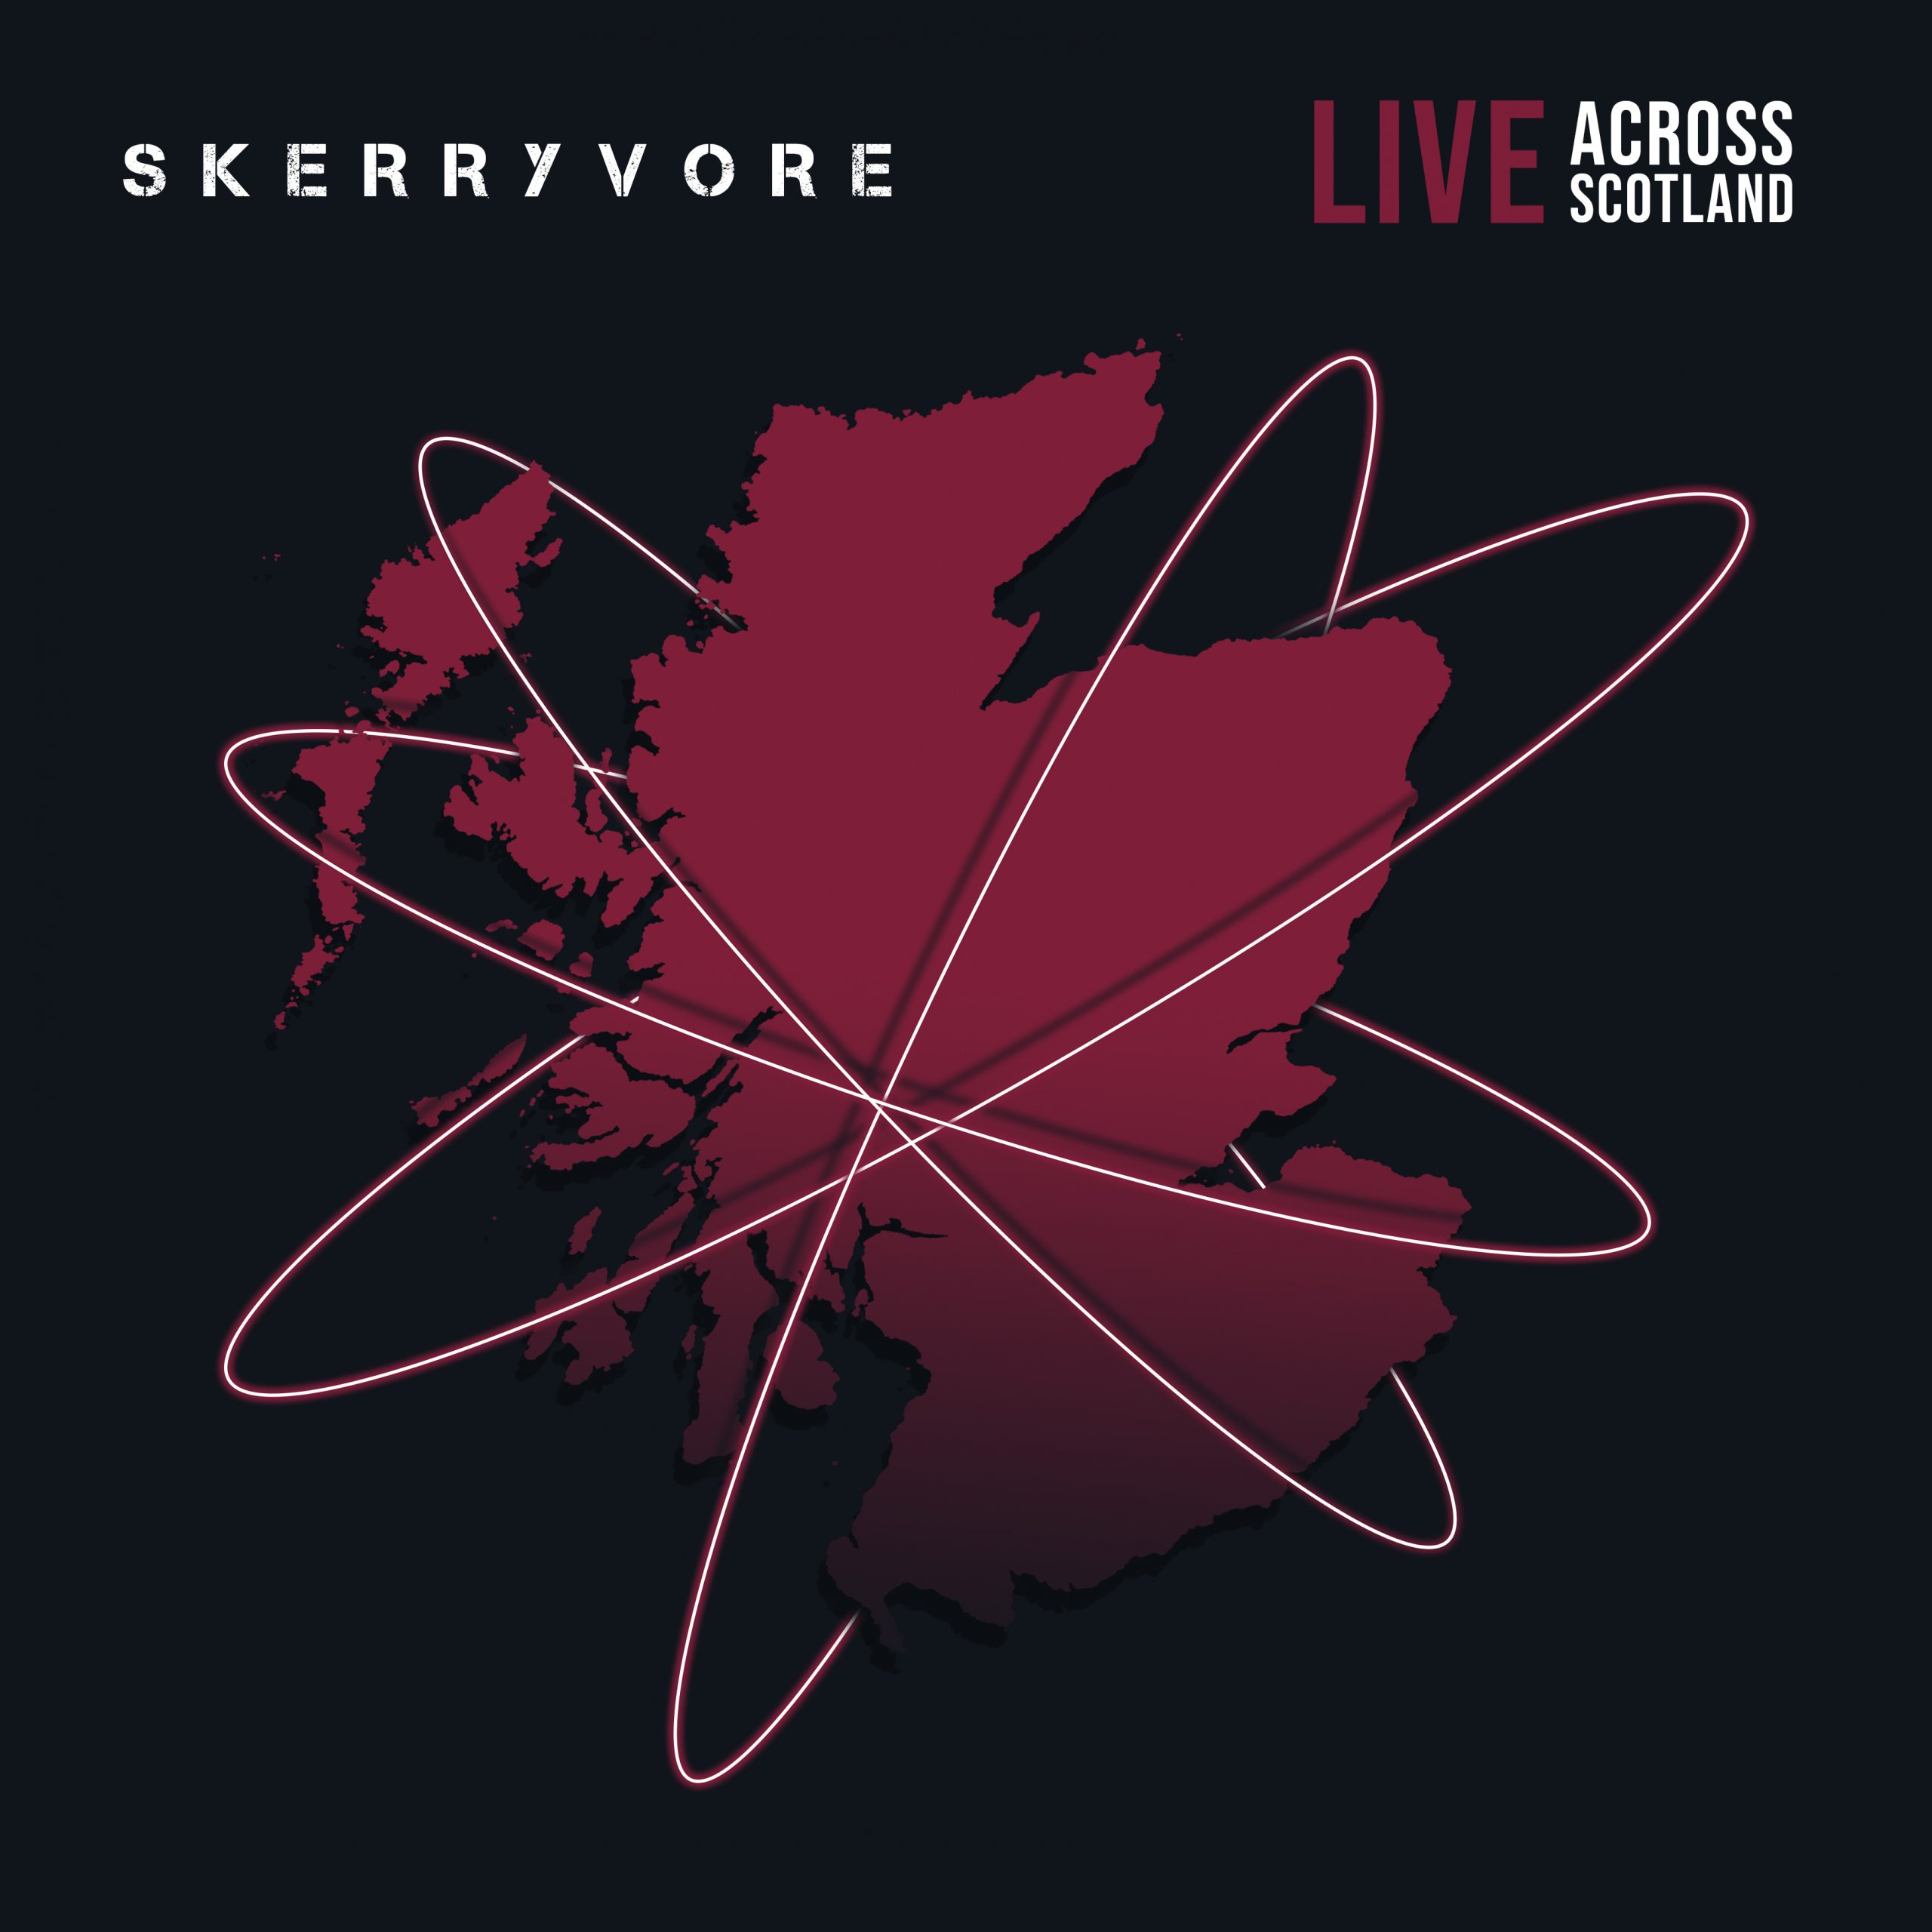 skerryvore tour support act